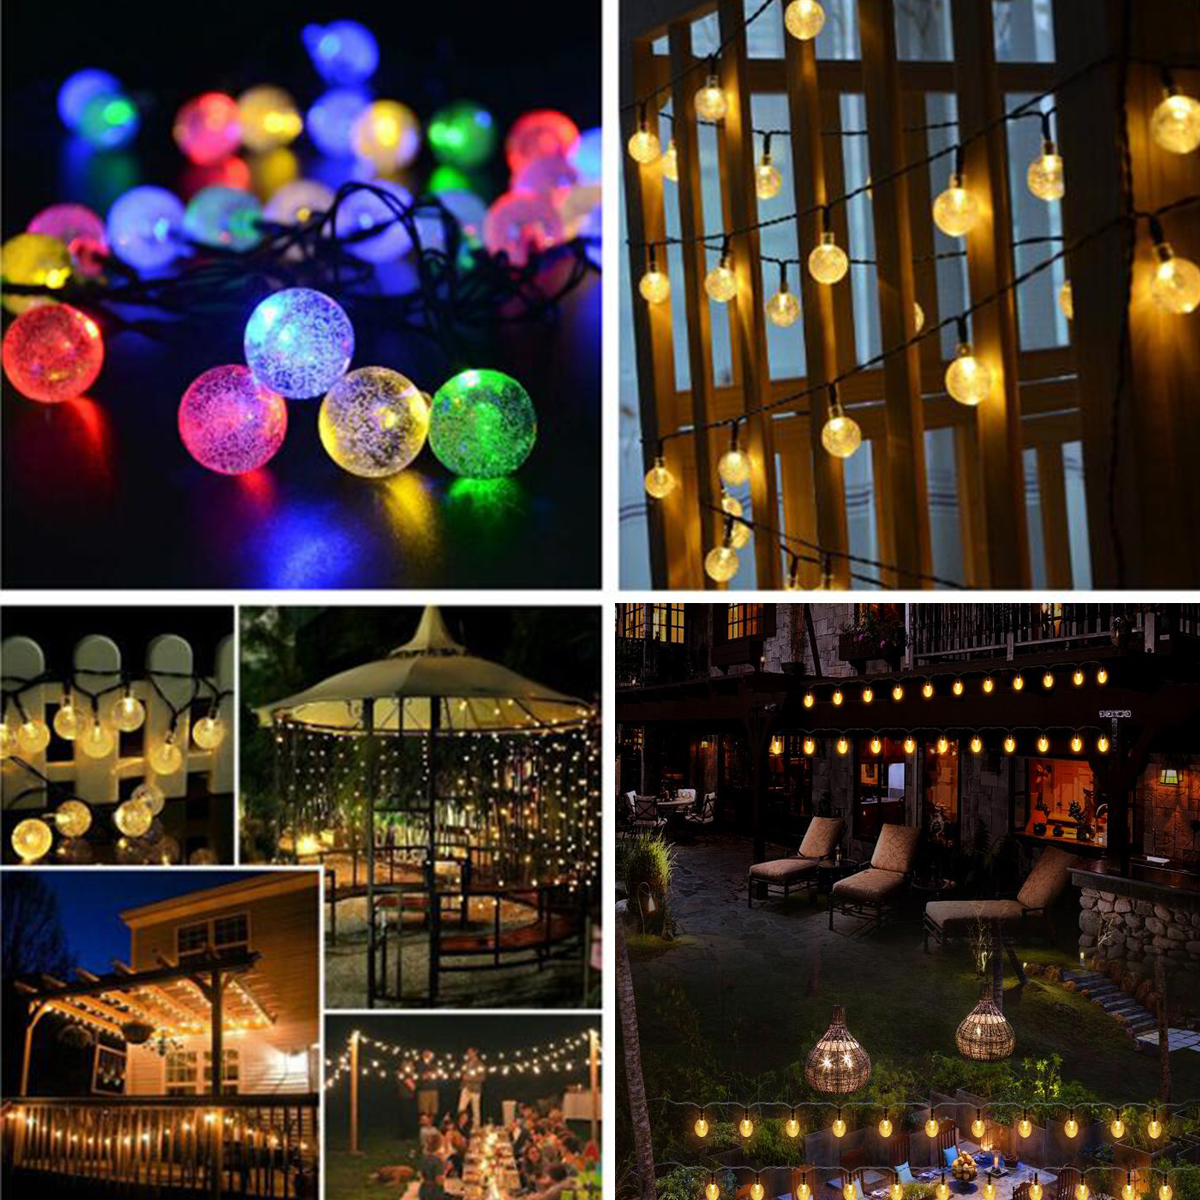 65M-30-LED-Solar-String-Ball-Lights-Outdoor-Waterproof-Warm-White-Garden-Christmas-Tree-Decorations--1672120-10